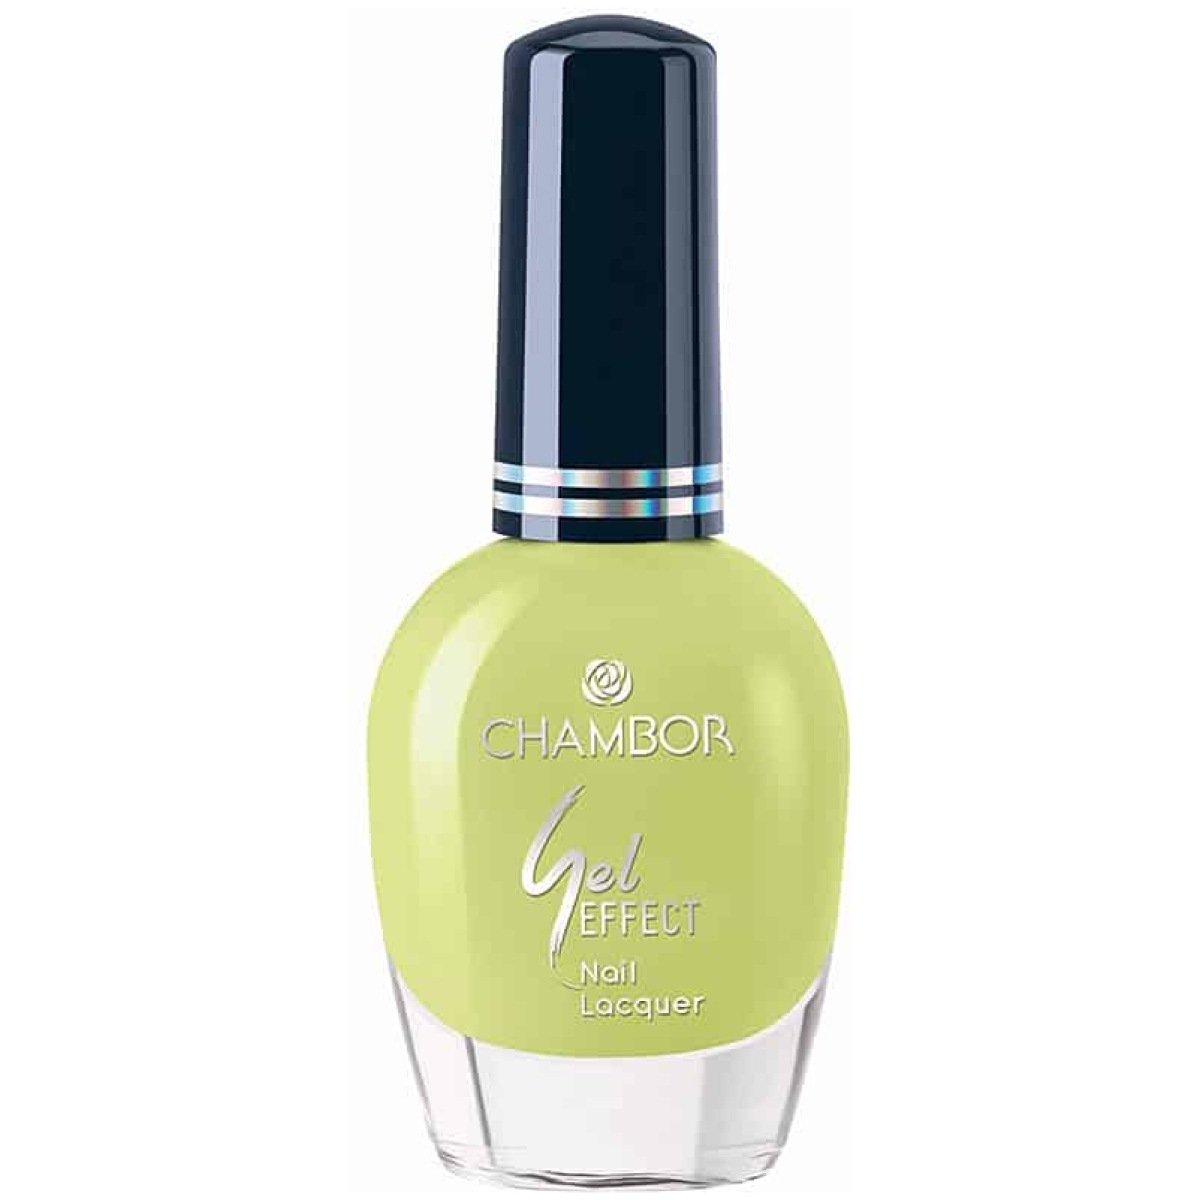 Buy Chambor Gel Effectnail Lacquer - 101 10 ml Online at Best Price in India